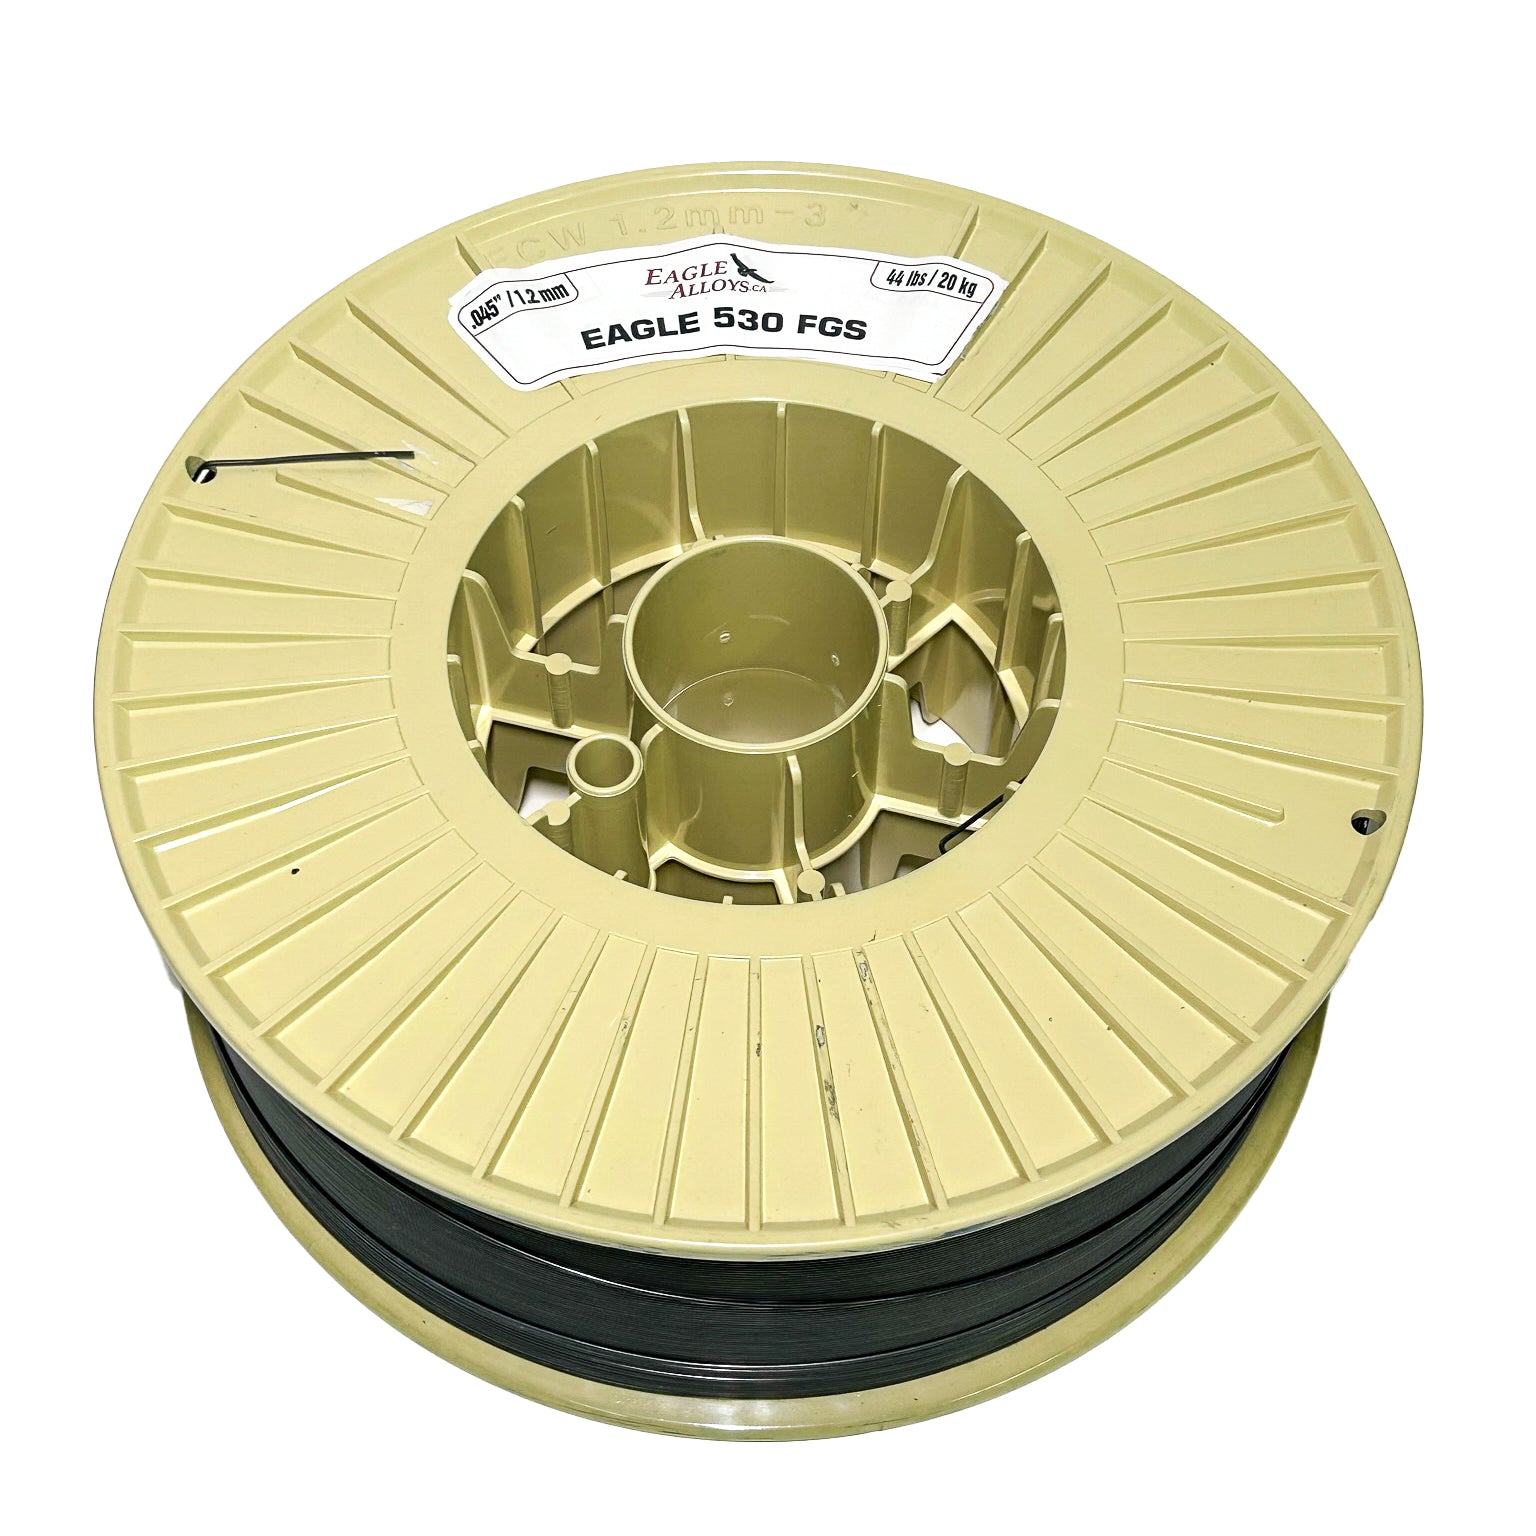 EAGLE 530 FGS | All Positions, High Deposition, Machinable Gas Shielded Flux Cored Wire For Build-Up